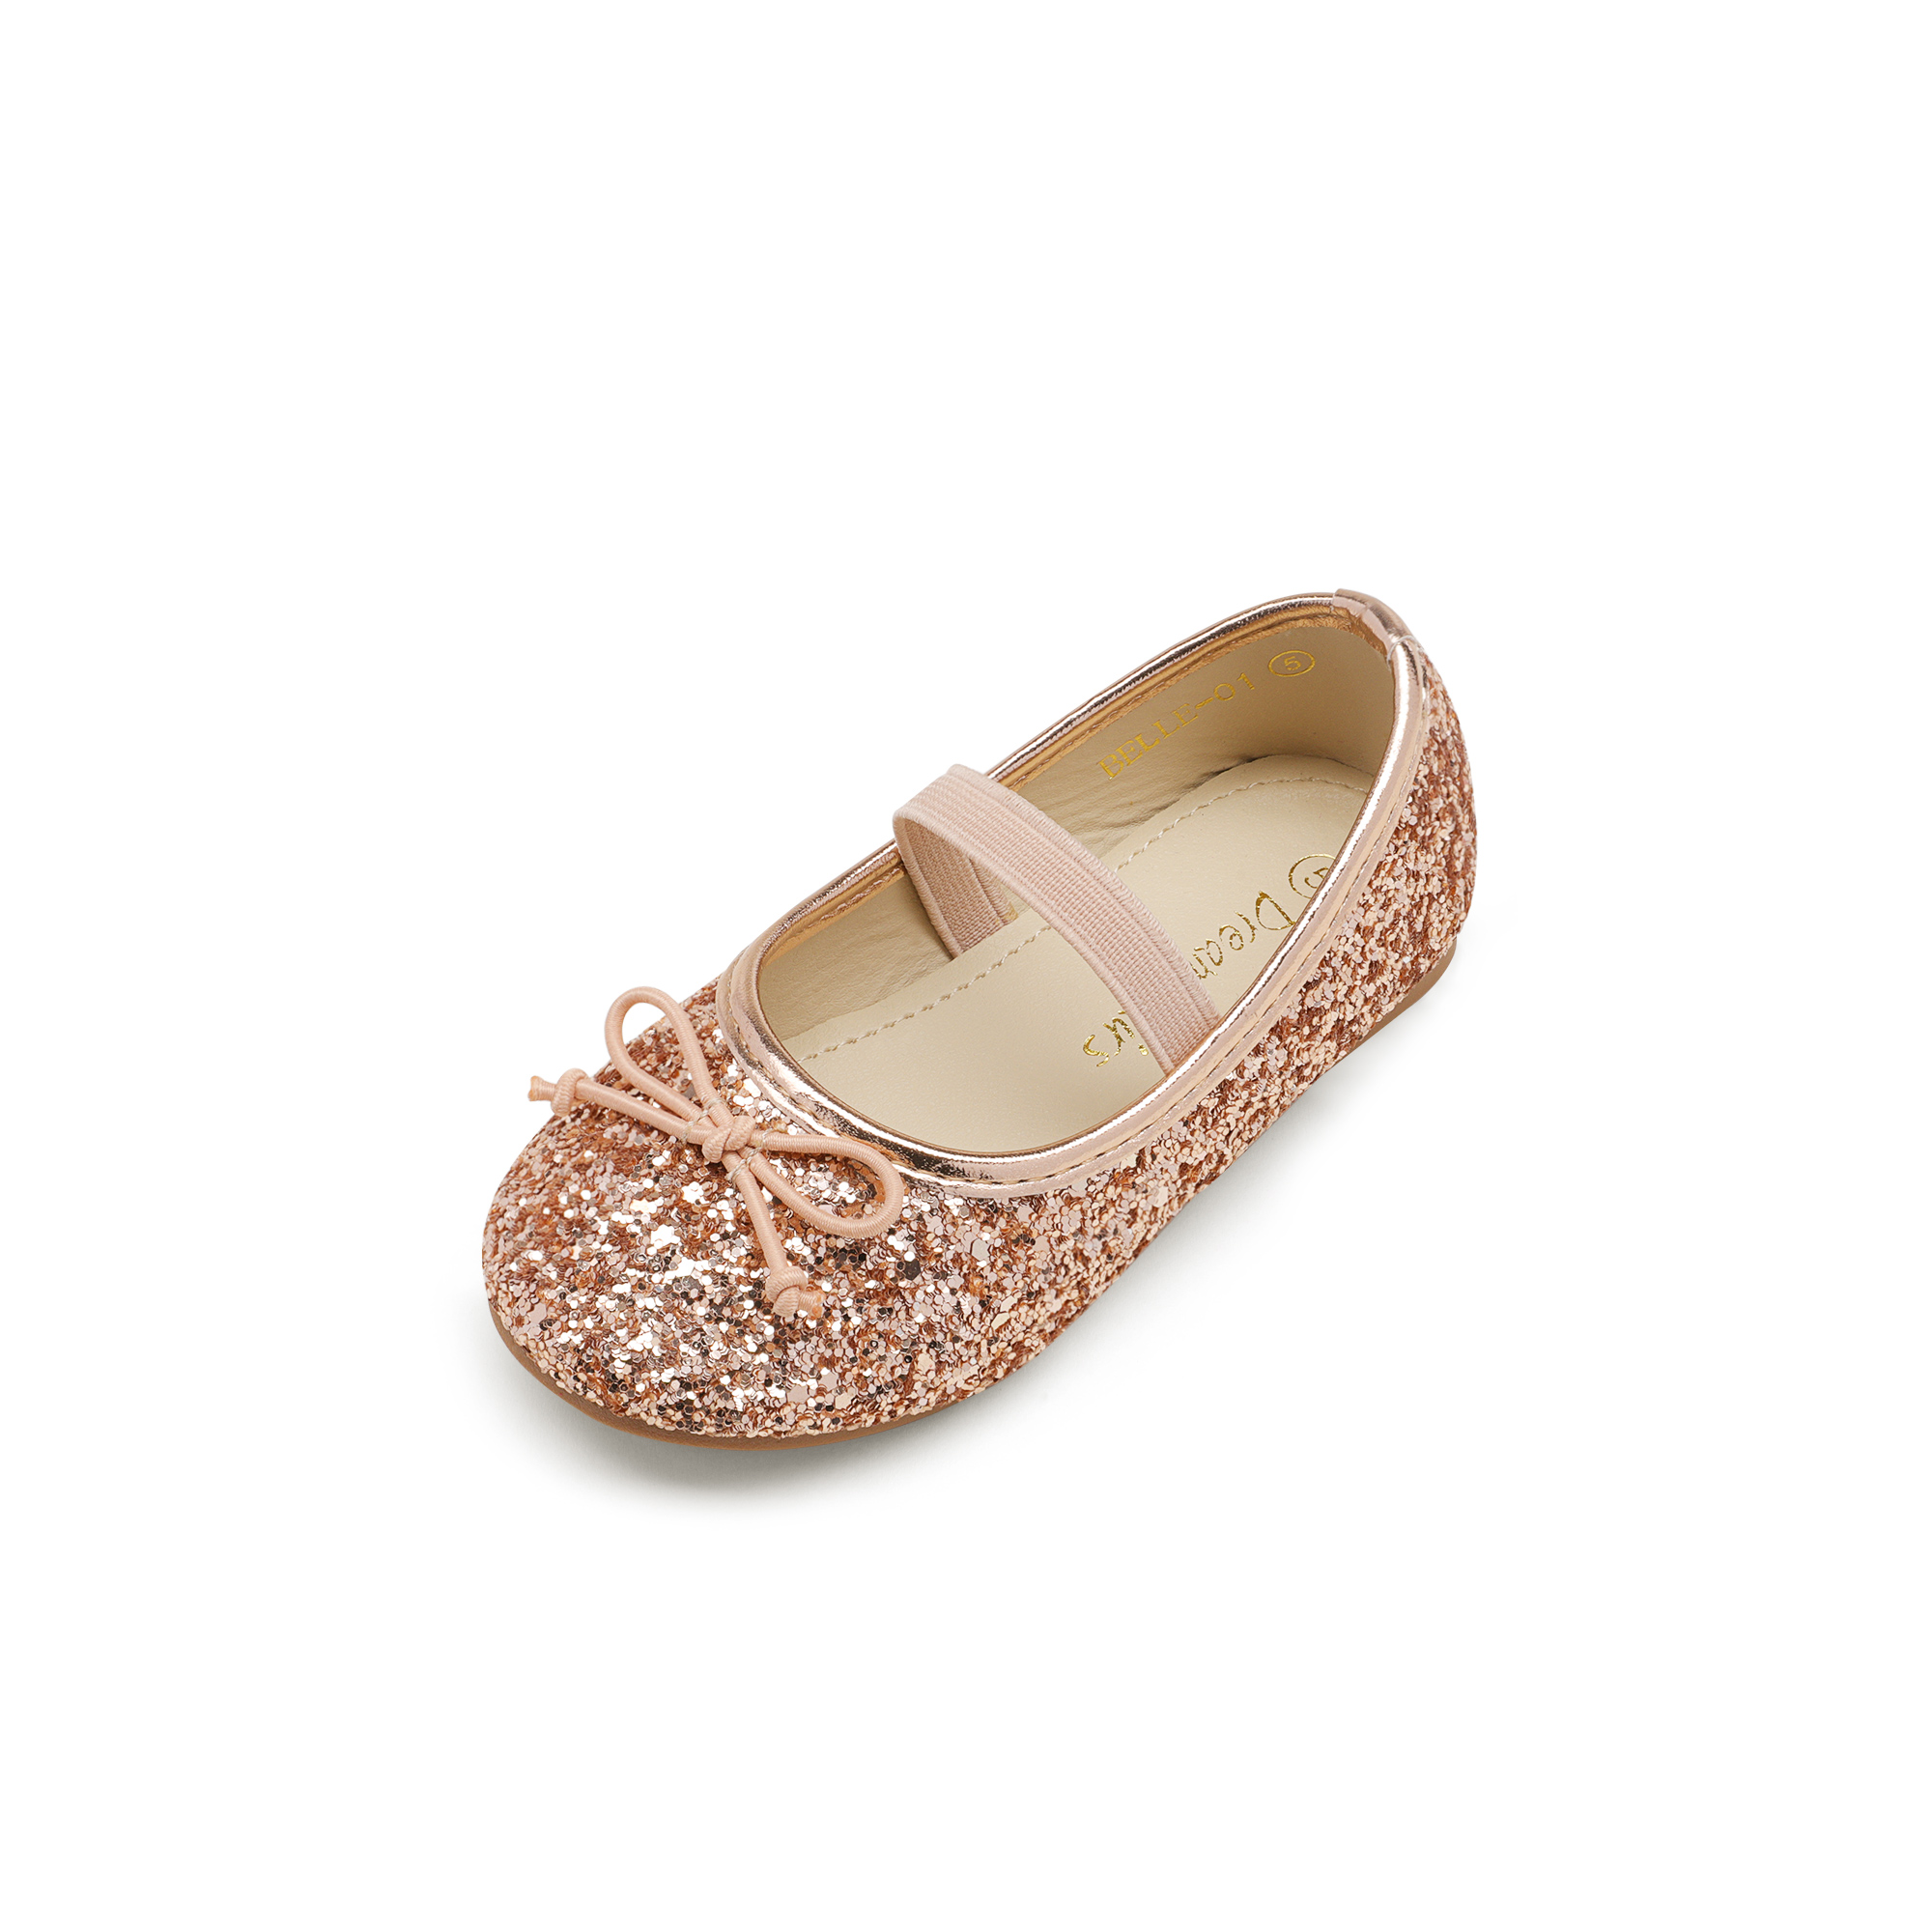 Toddlers' Ballerina Flat Shoes | Girls Flats Shoes-Dream Pairs